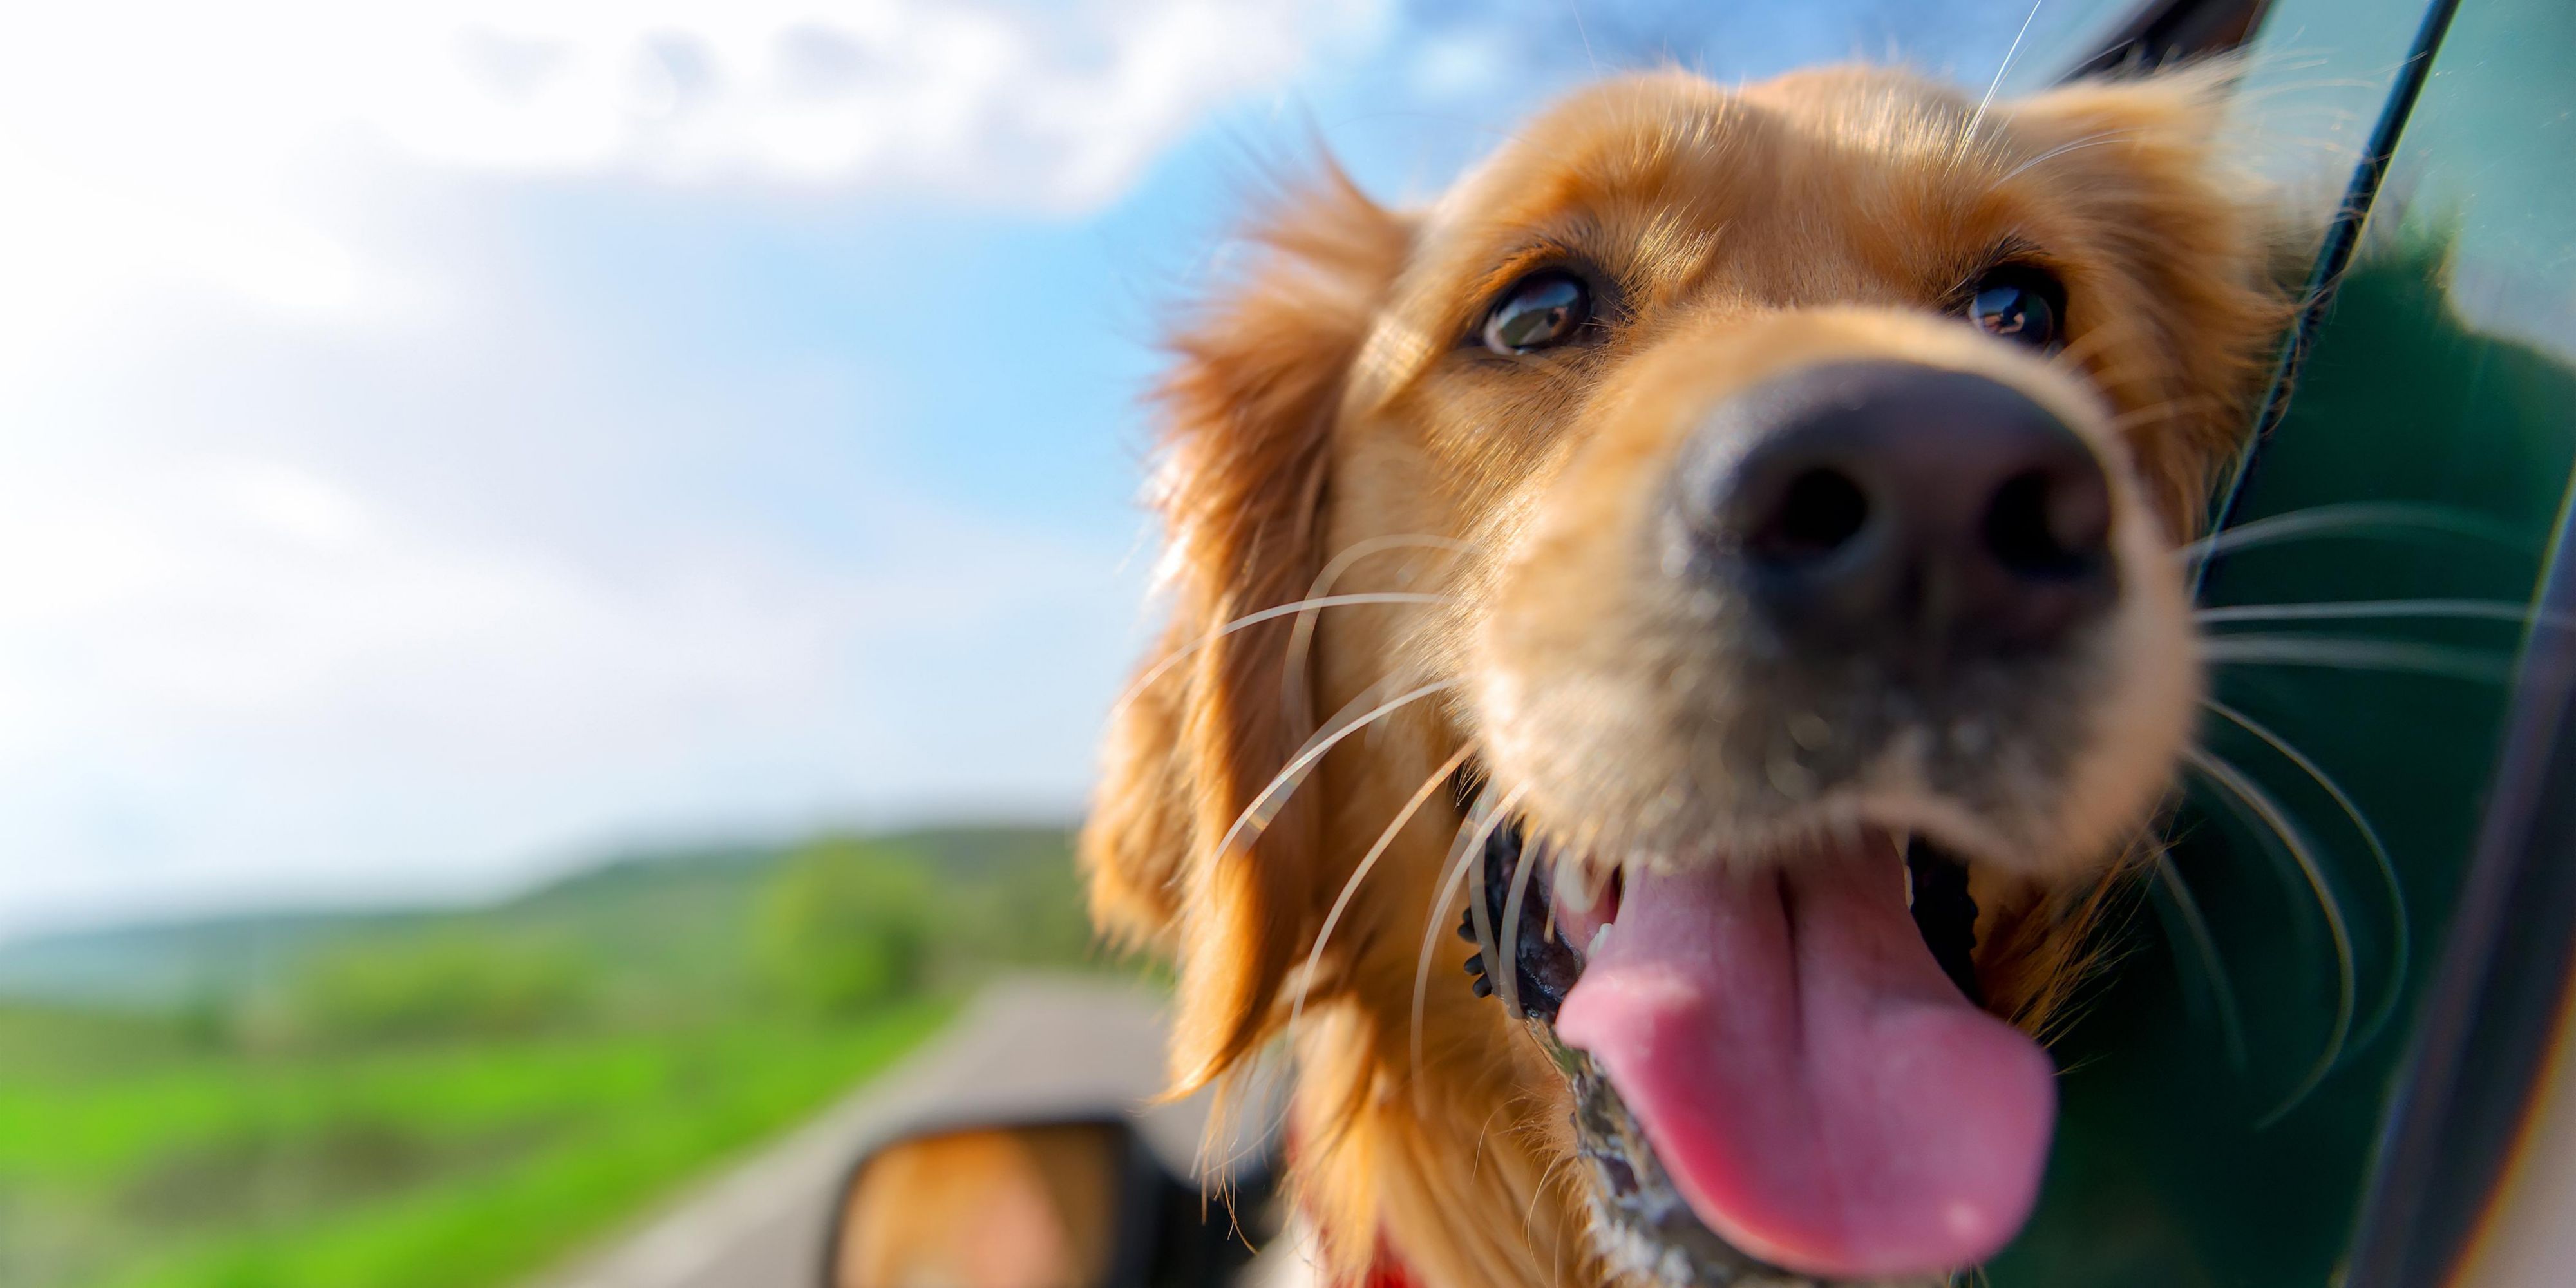 Dogs are welcome at Holiday Inn Express Krefeld – Dusseldorf. There is a pet fee per night of 25.00 Euro. Pets are welcome by prior arrangements with the hotel. A 25.00 Euro deposit per pet per stay will be collected at check in.